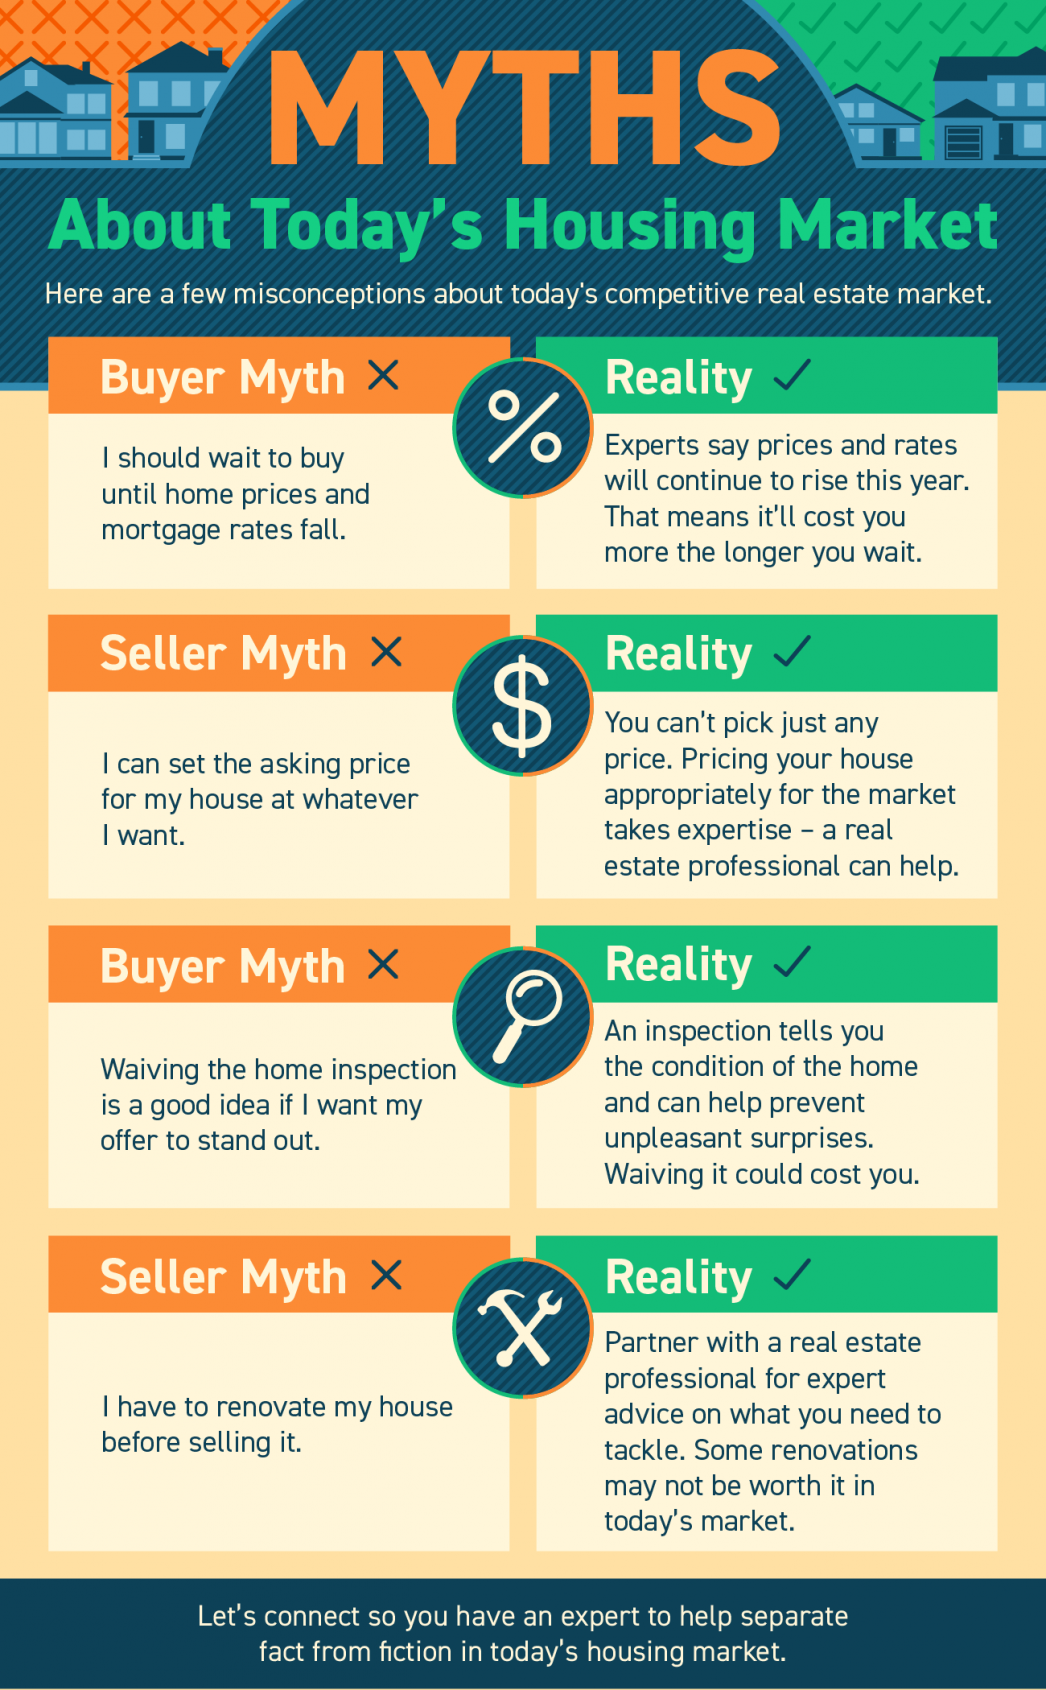 Myths About Today’s Housing Market - INFOGRAPHIC - KM Realty Group Chicago